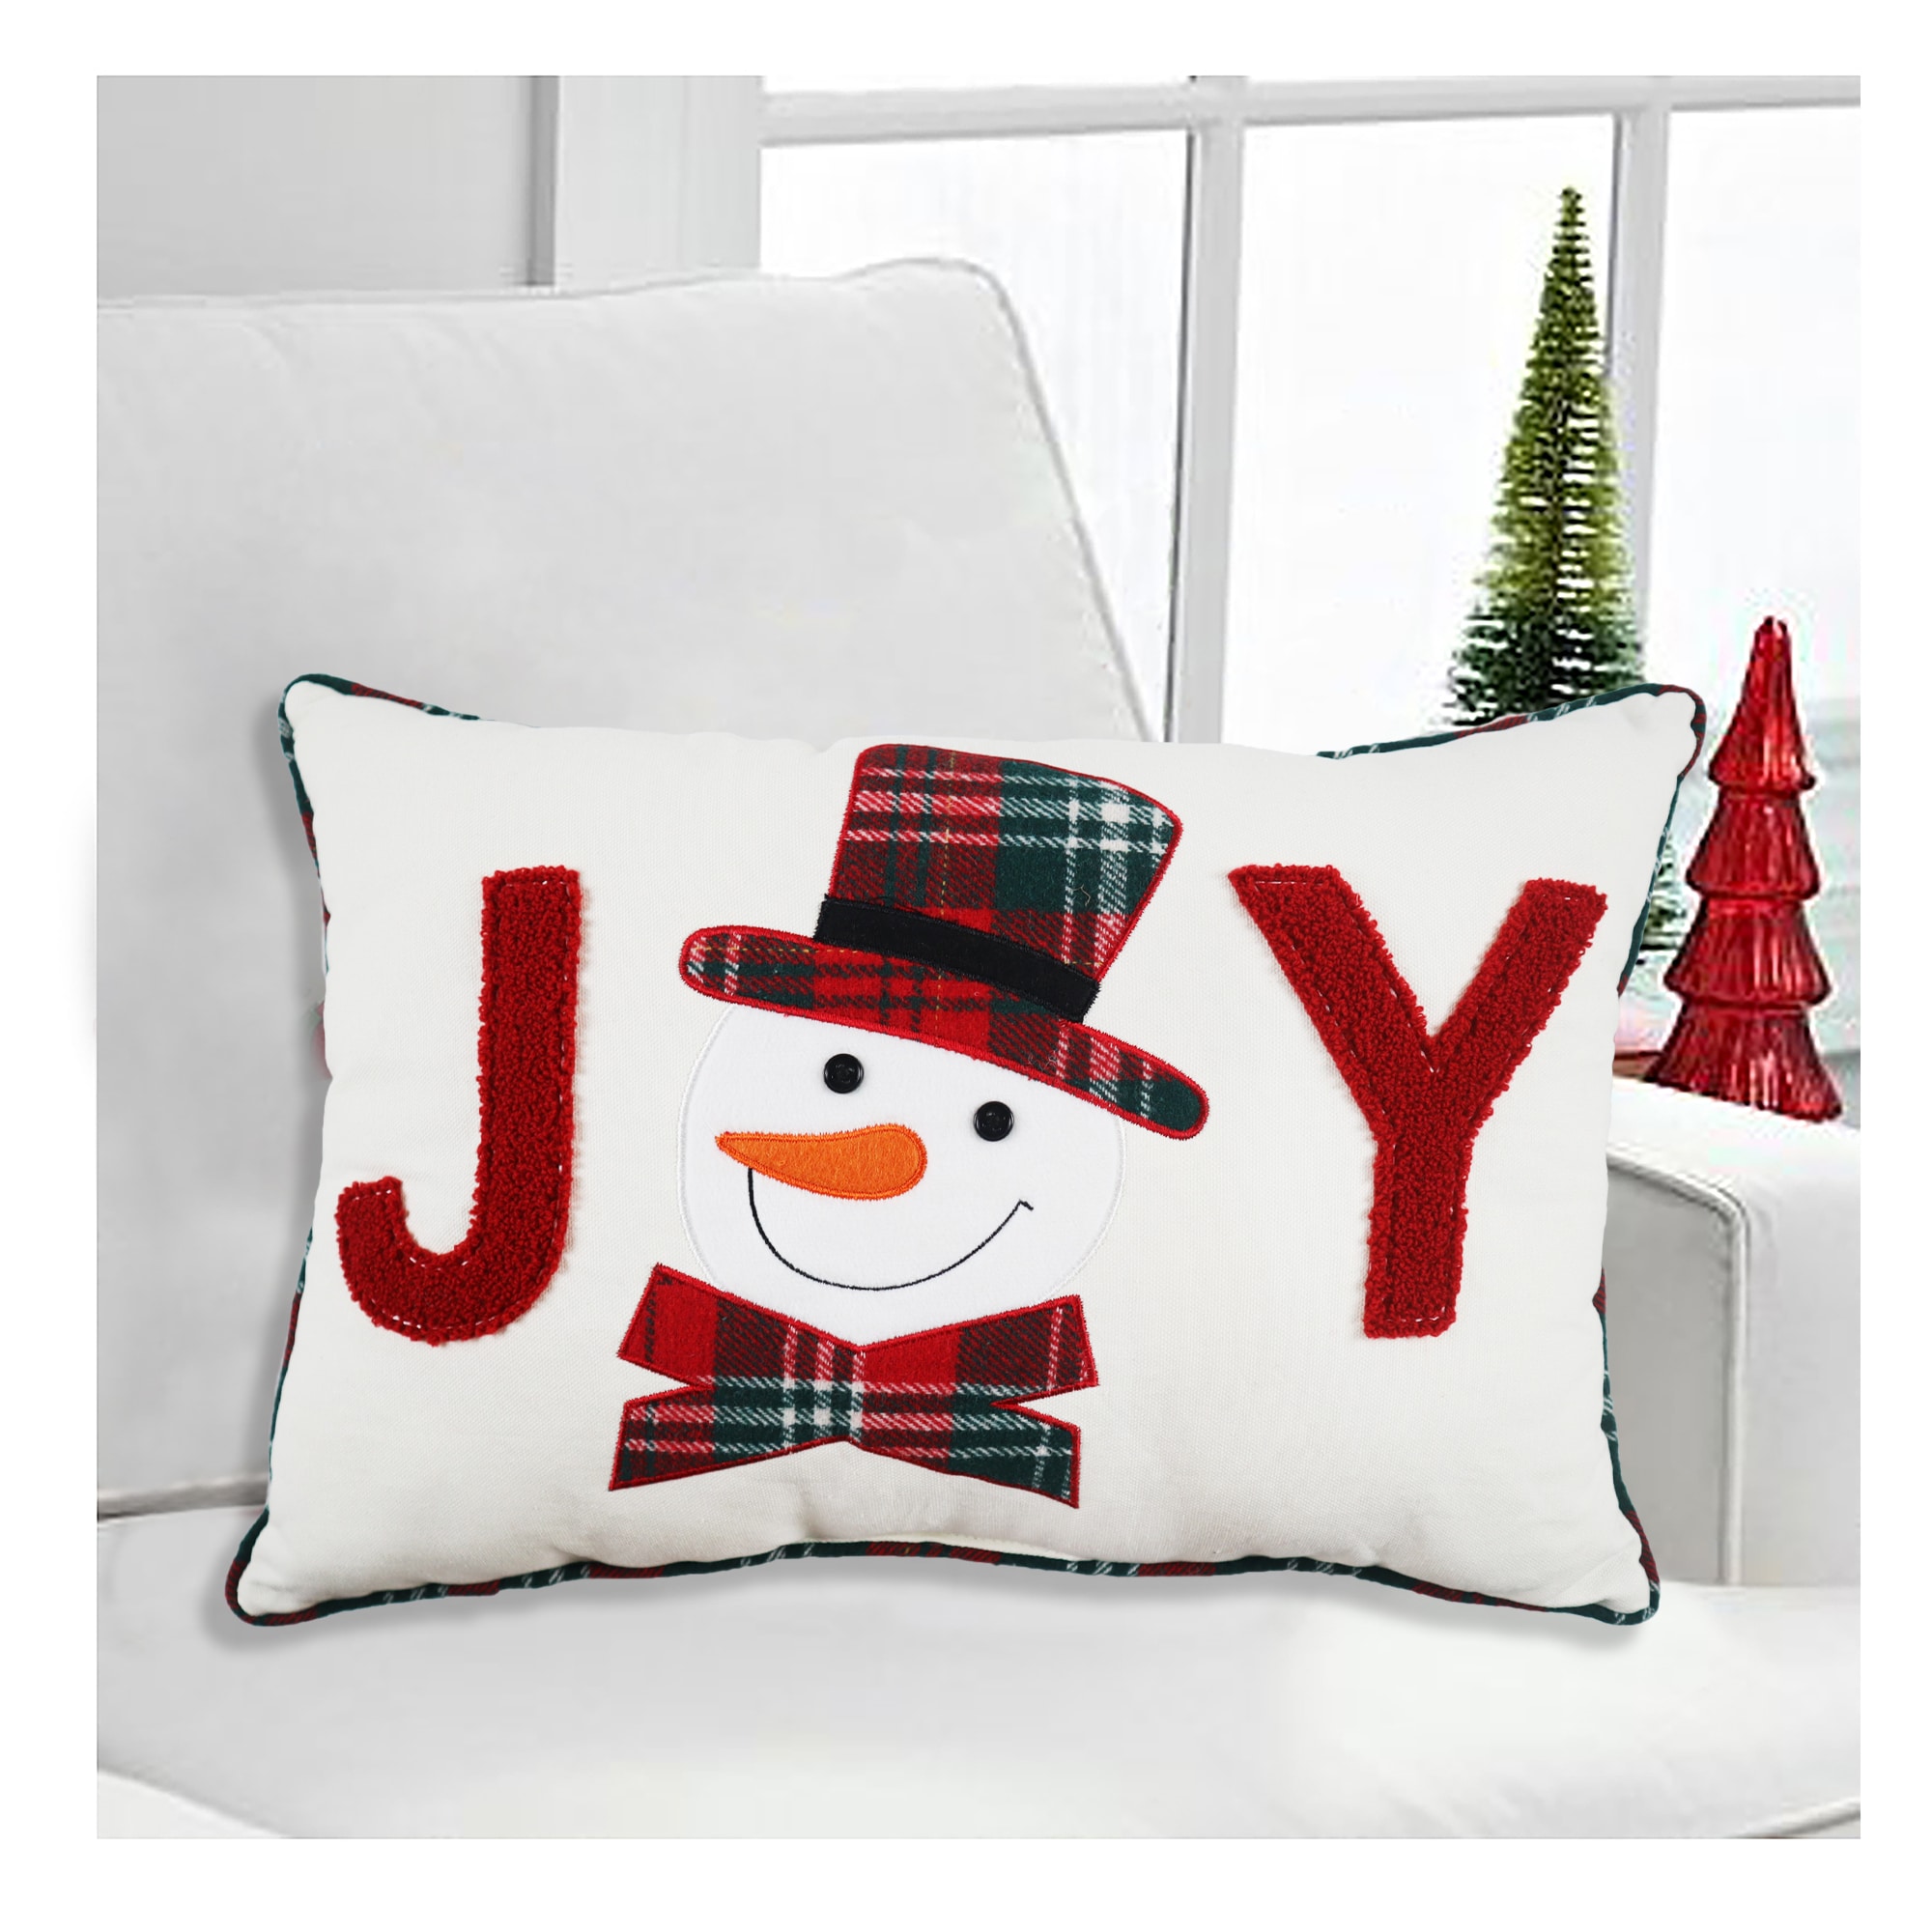 Christmas, Christmas Throw Pillows, Pillow Case Only NO Inserts/Fall decor,  Pool Decor, Couch Pillows